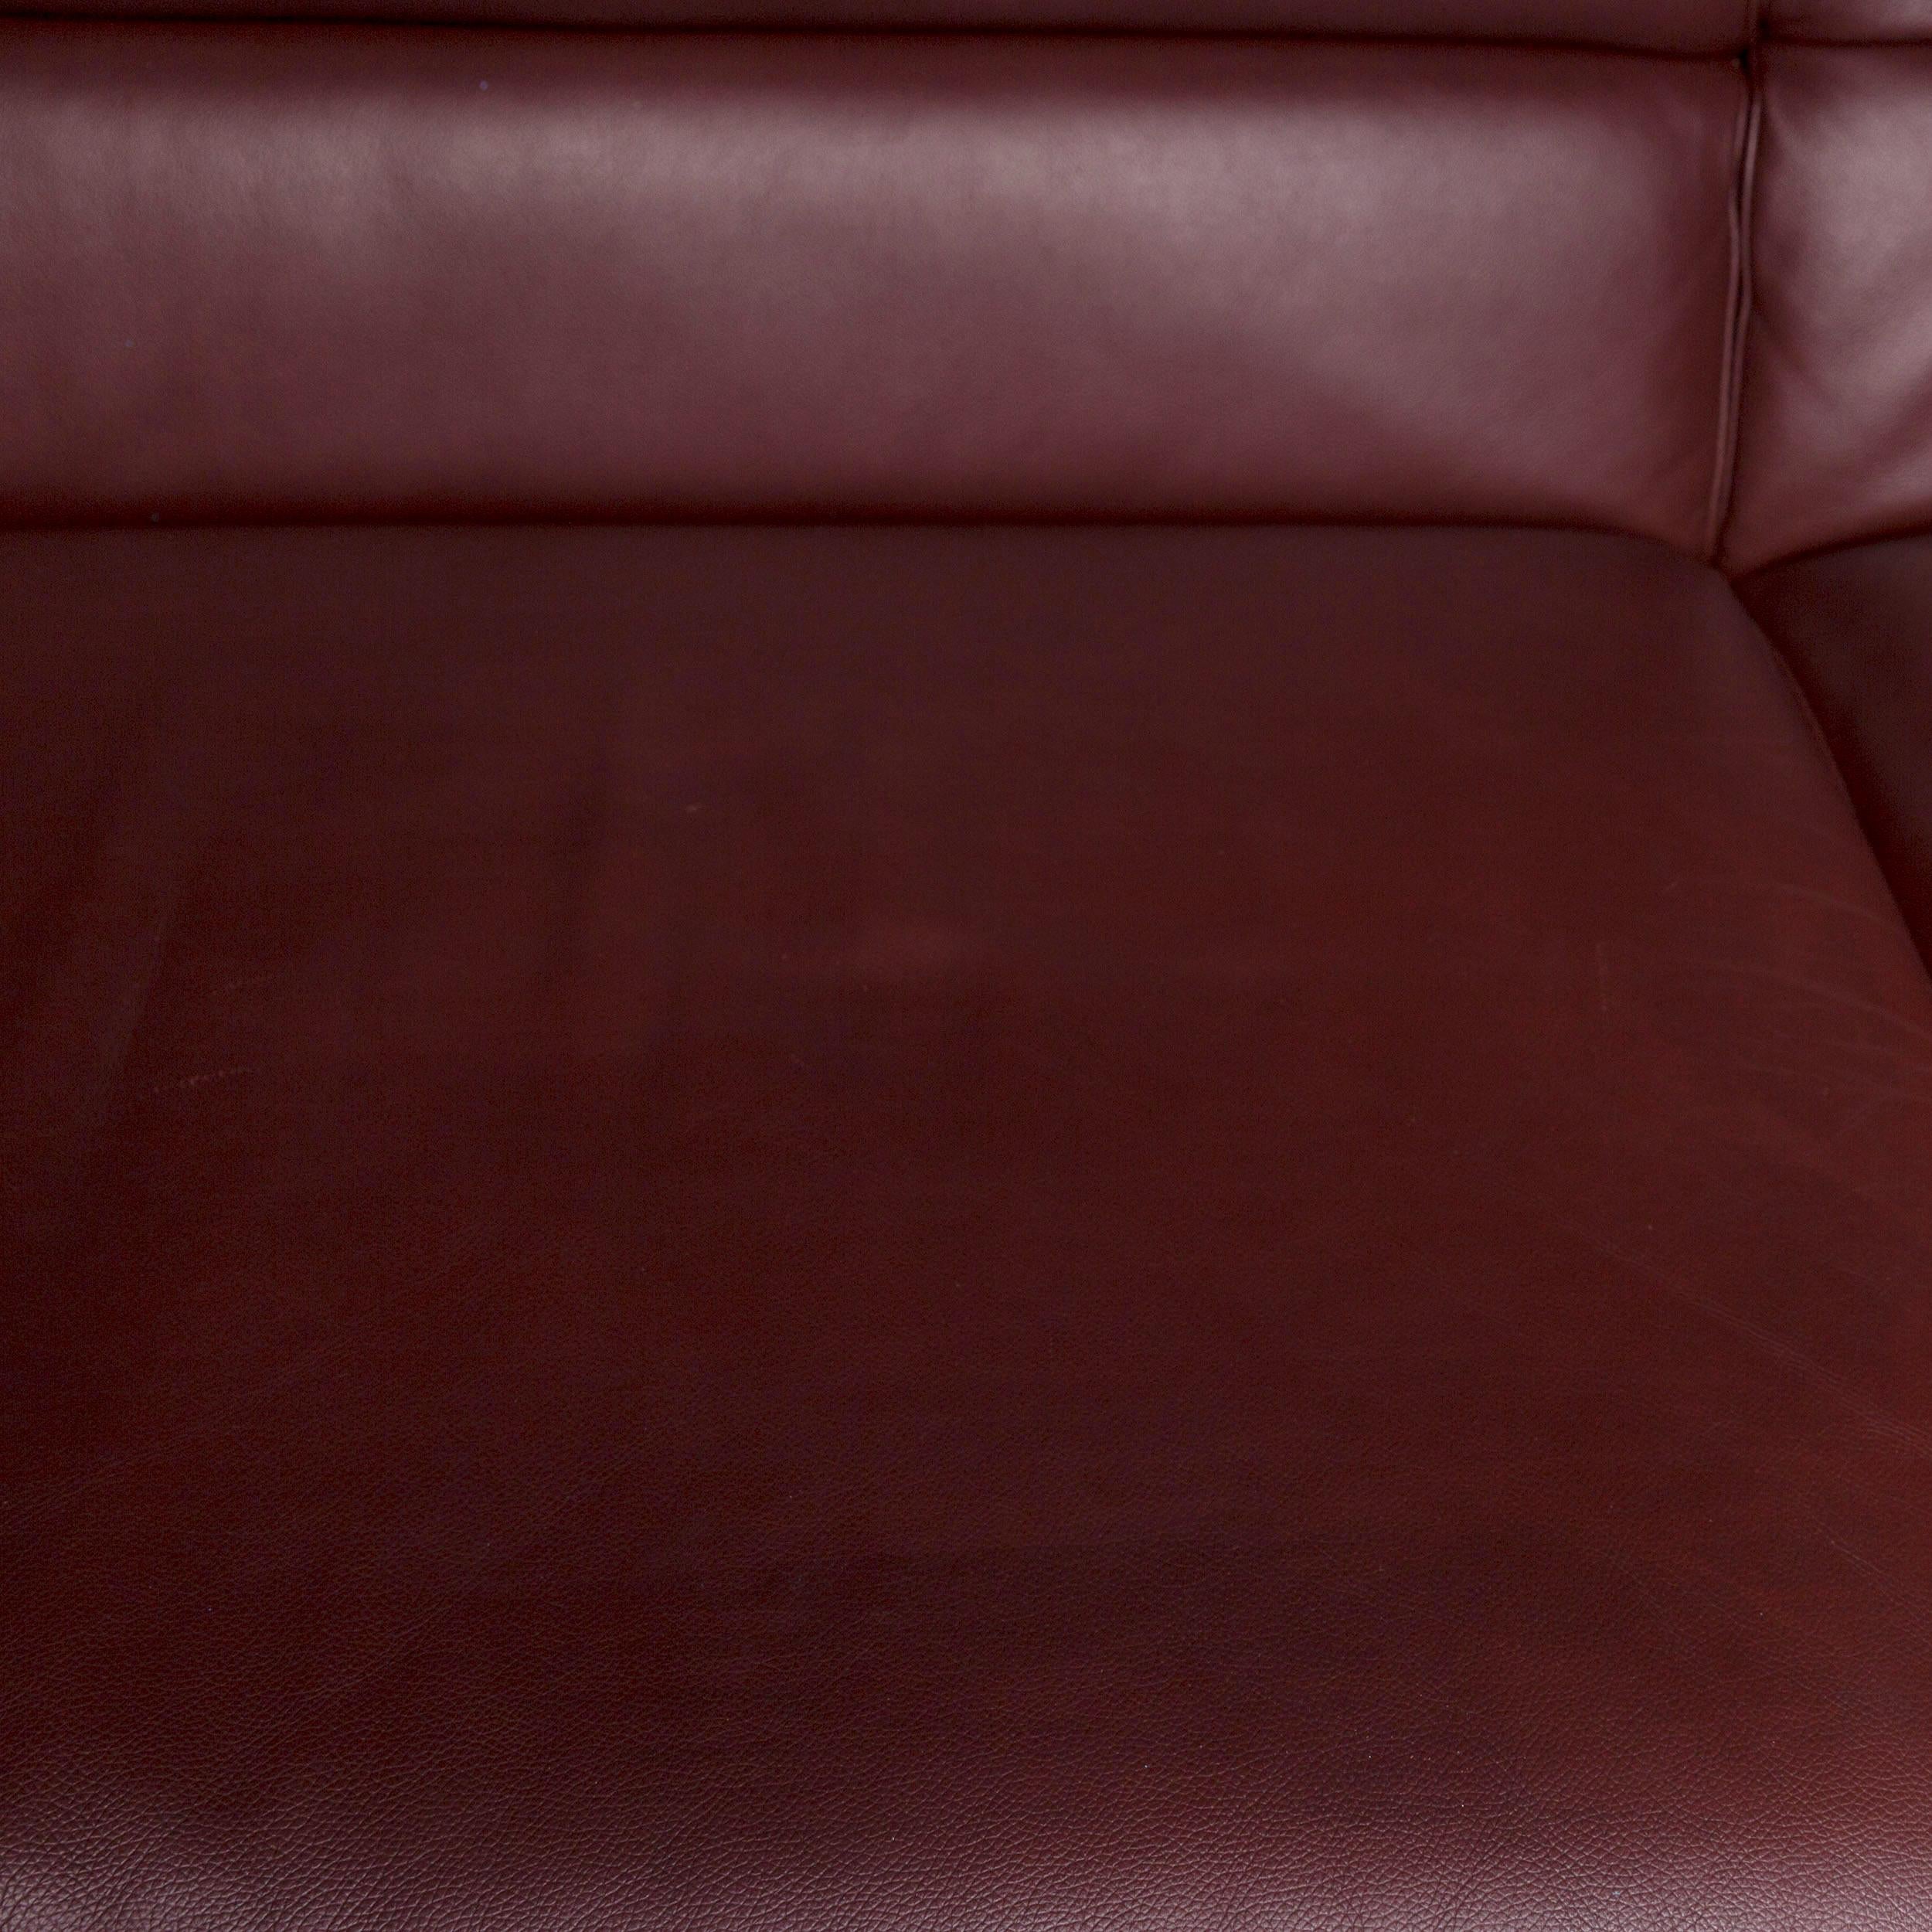 Brühl & Sippold Leather Corner Sofa Bordeaux Dark Red Auburn Sofa Function Couch In Good Condition For Sale In Cologne, DE